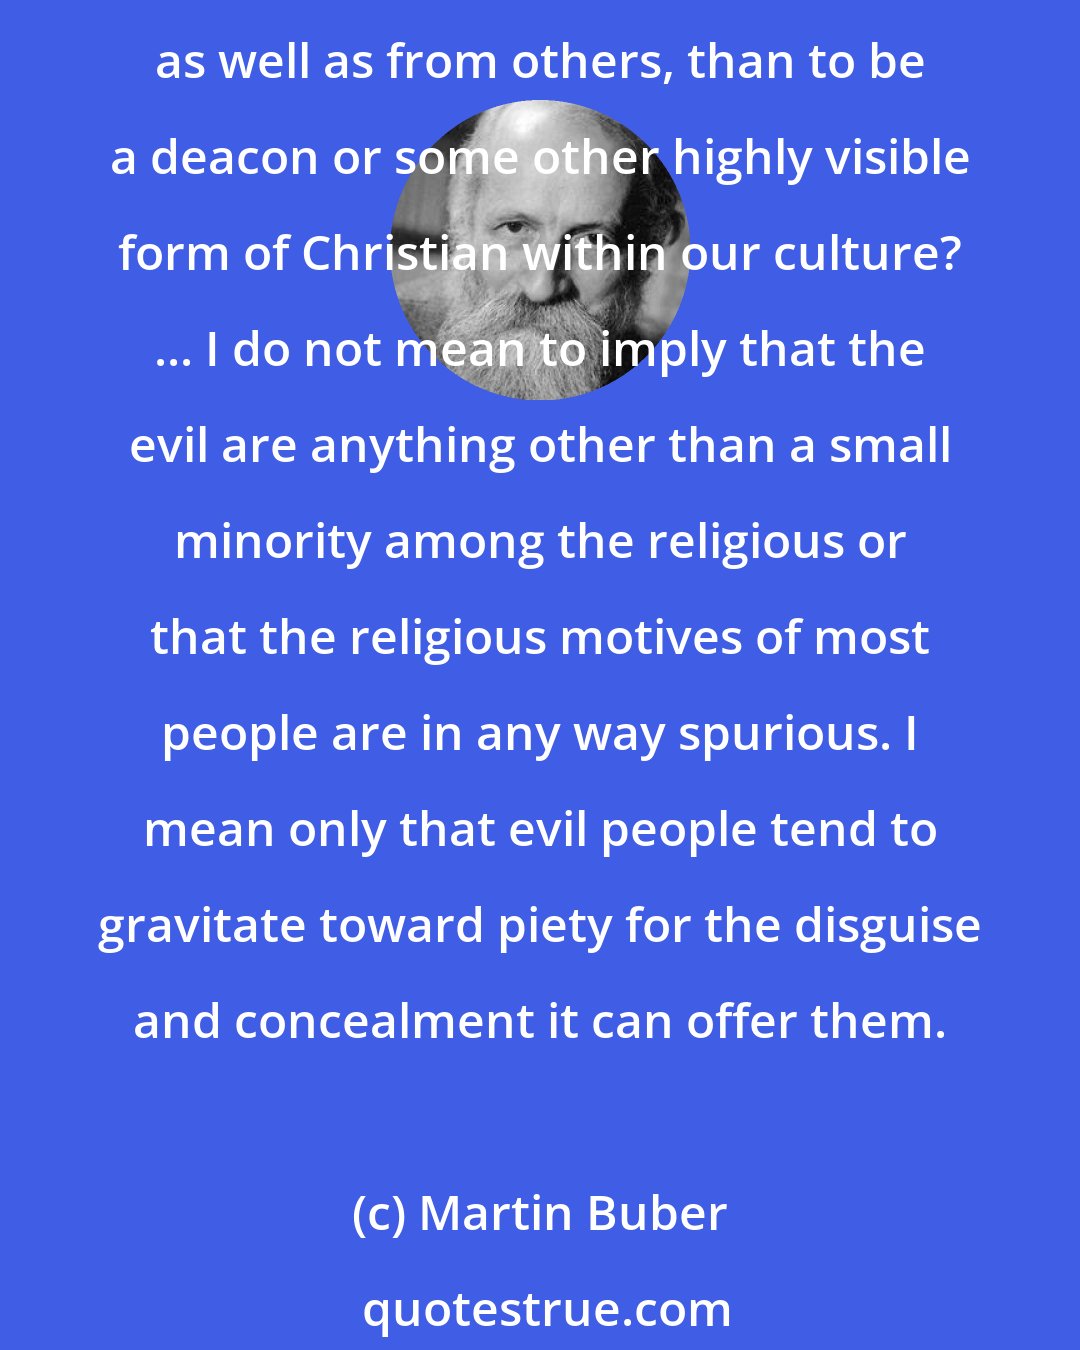 Martin Buber: Since the primary motive of the evil is disguise, one of the places evil people are most likely to be found is within the church. What better way to conceal one's evil from oneself, as well as from others, than to be a deacon or some other highly visible form of Christian within our culture? ... I do not mean to imply that the evil are anything other than a small minority among the religious or that the religious motives of most people are in any way spurious. I mean only that evil people tend to gravitate toward piety for the disguise and concealment it can offer them.